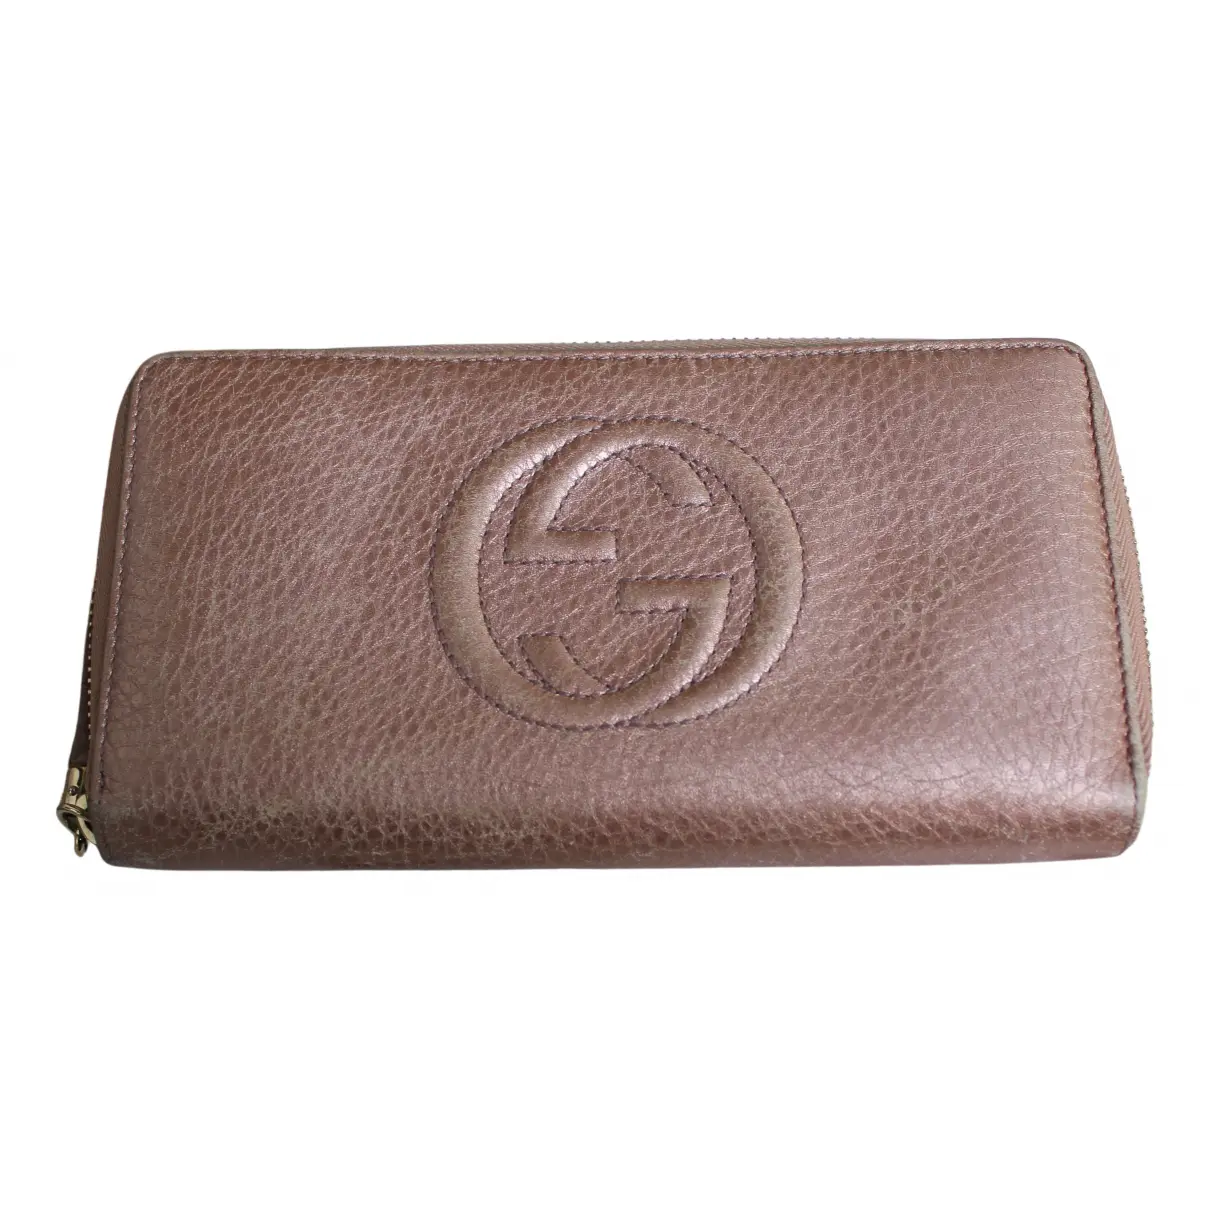 Soho leather wallet Gucci - Vintage